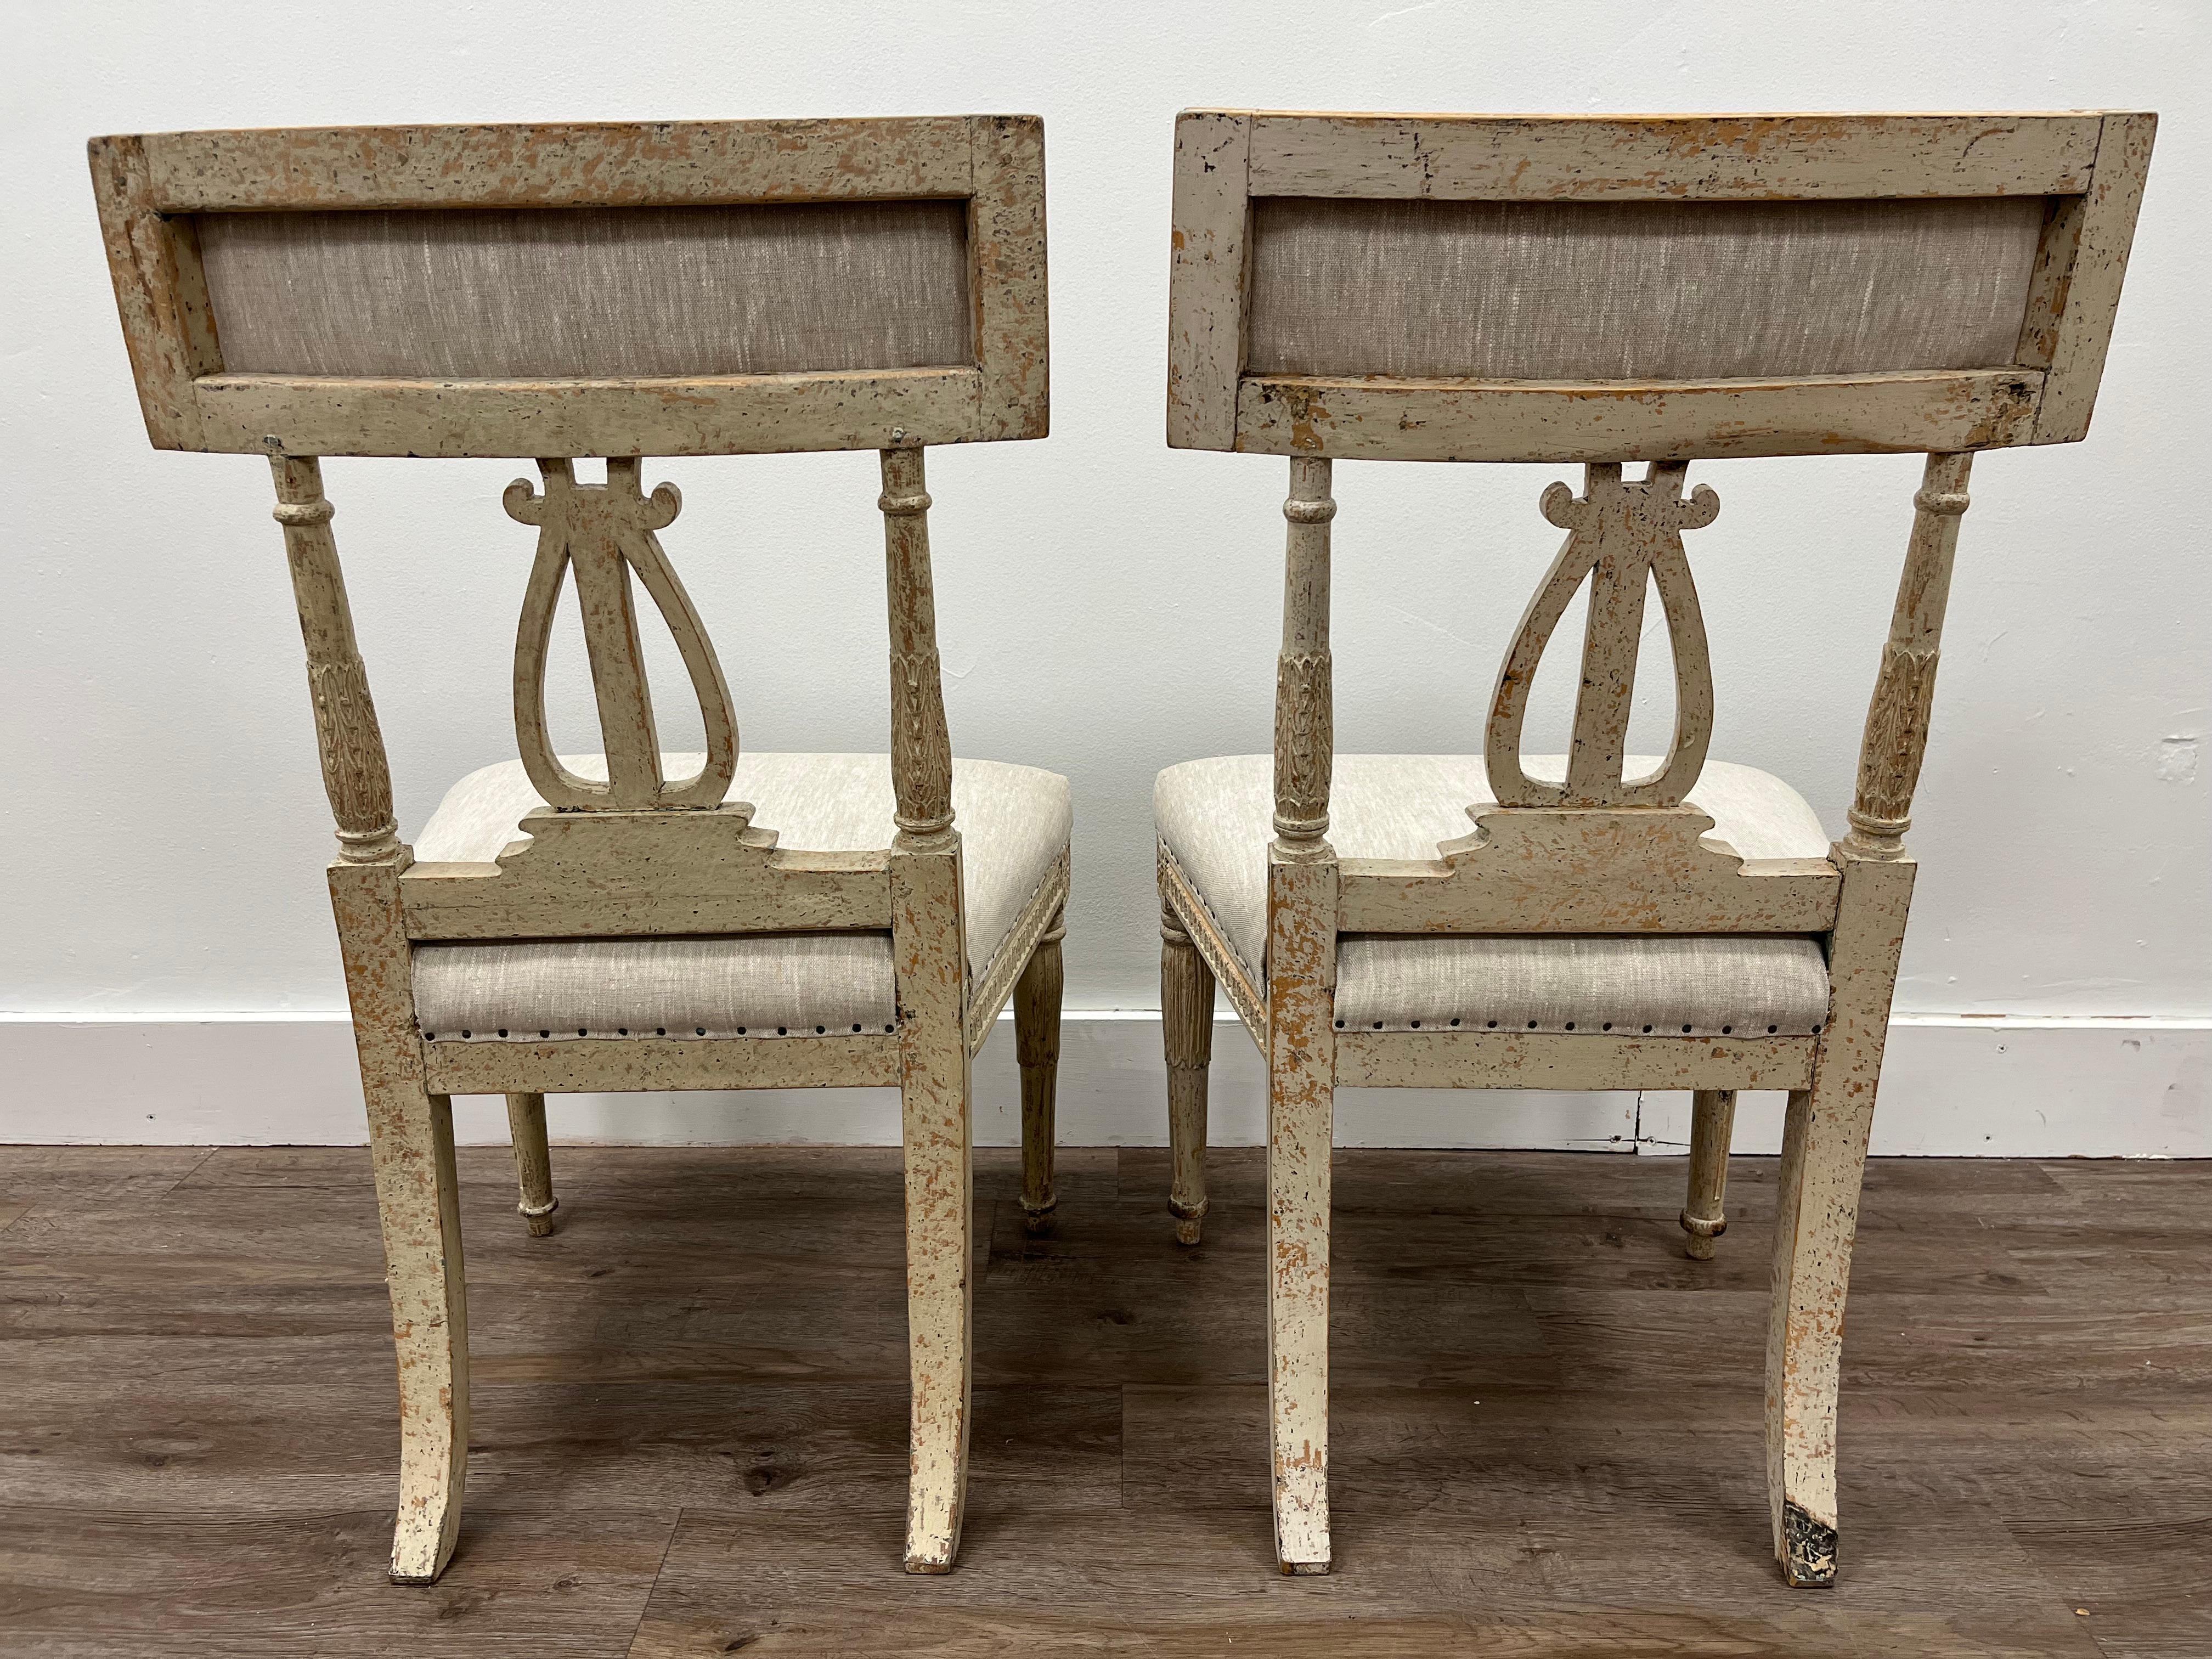 Pair of 18th Century Swedish Gustavian Lyre Chairs For Sale 3